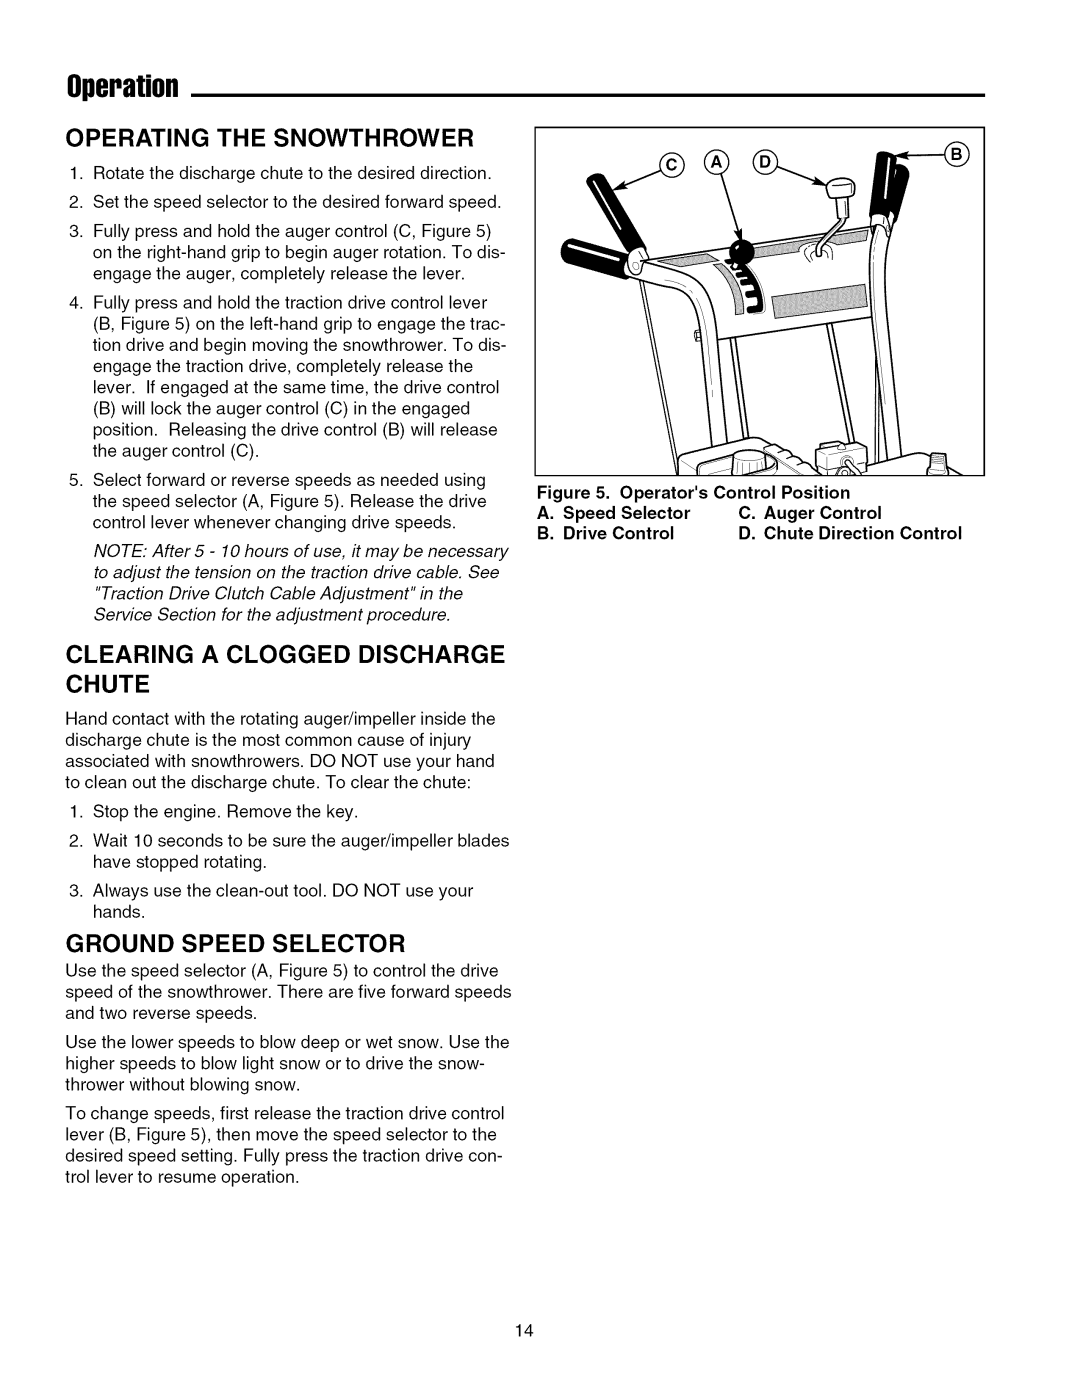 Simplicity 7800085 manual Operation, Operating The Snowthrower, Clearing A Clogged Discharge Chute, Ground Speed Selector 